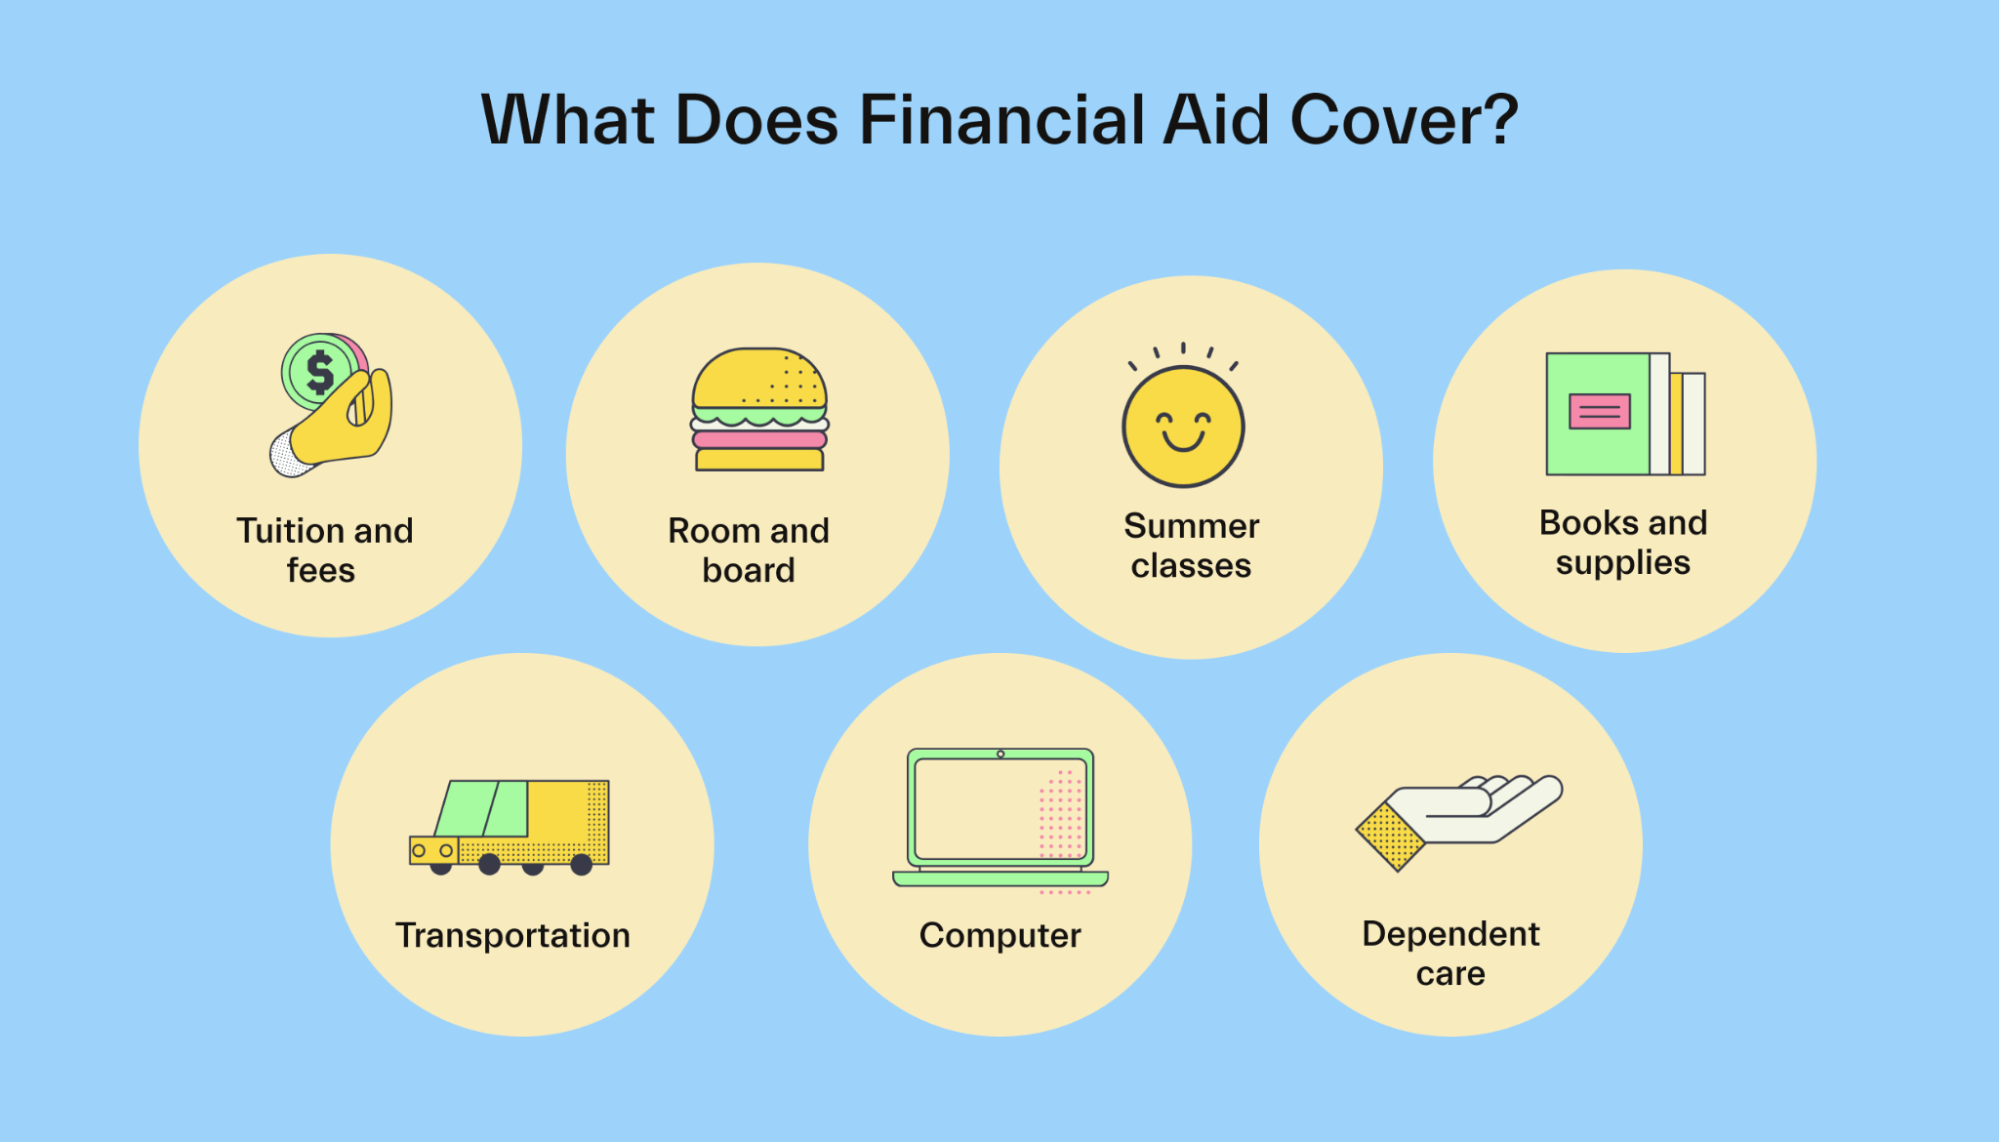 Financial aid guidelines